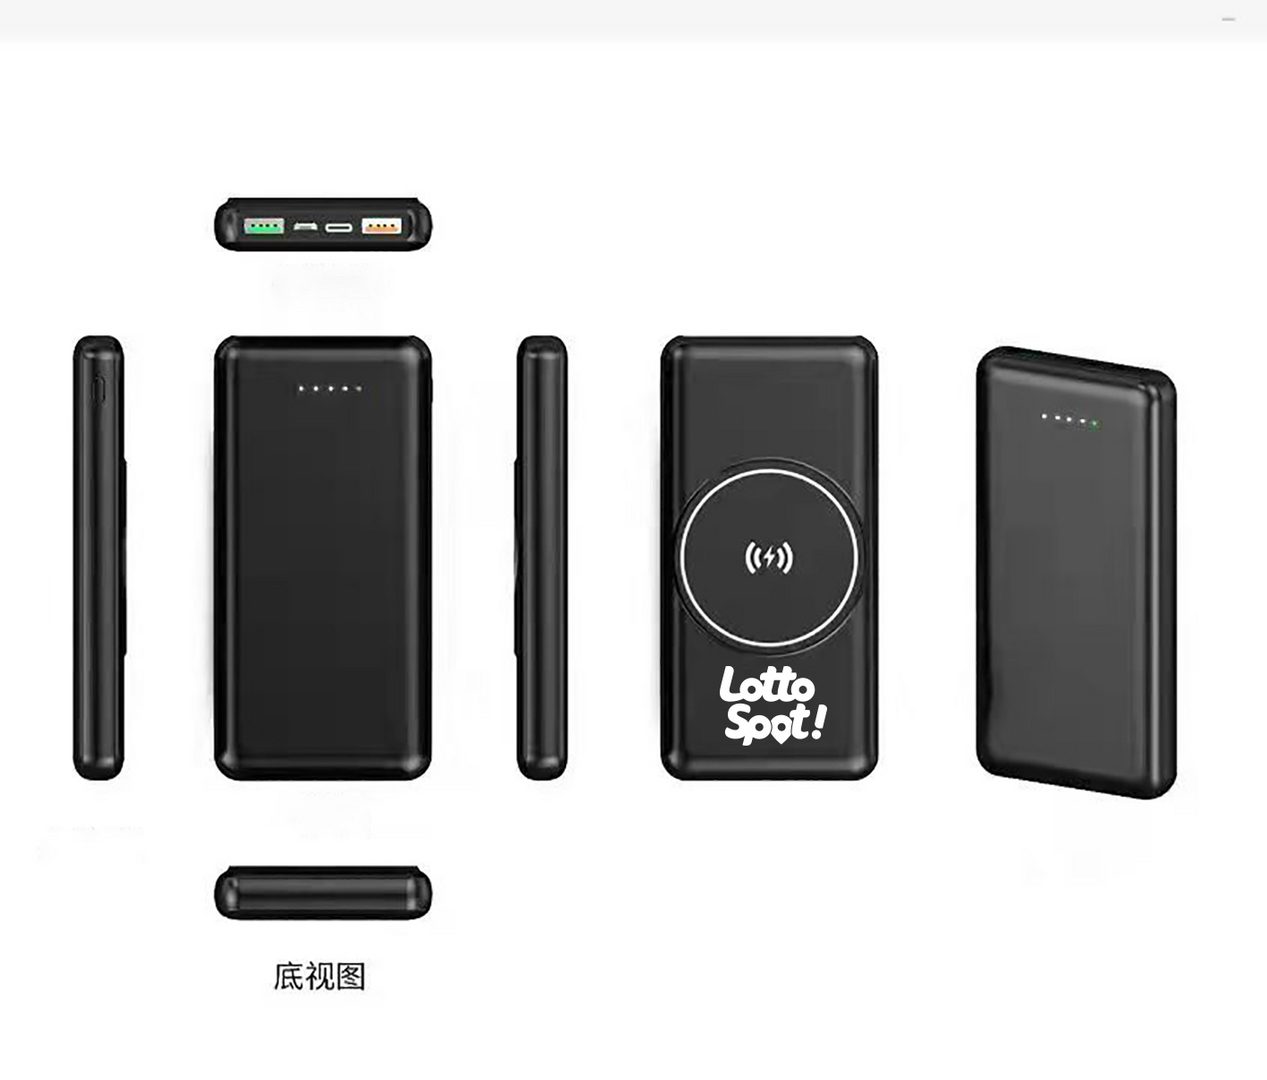 Seven Black Wireless Battery Chargers